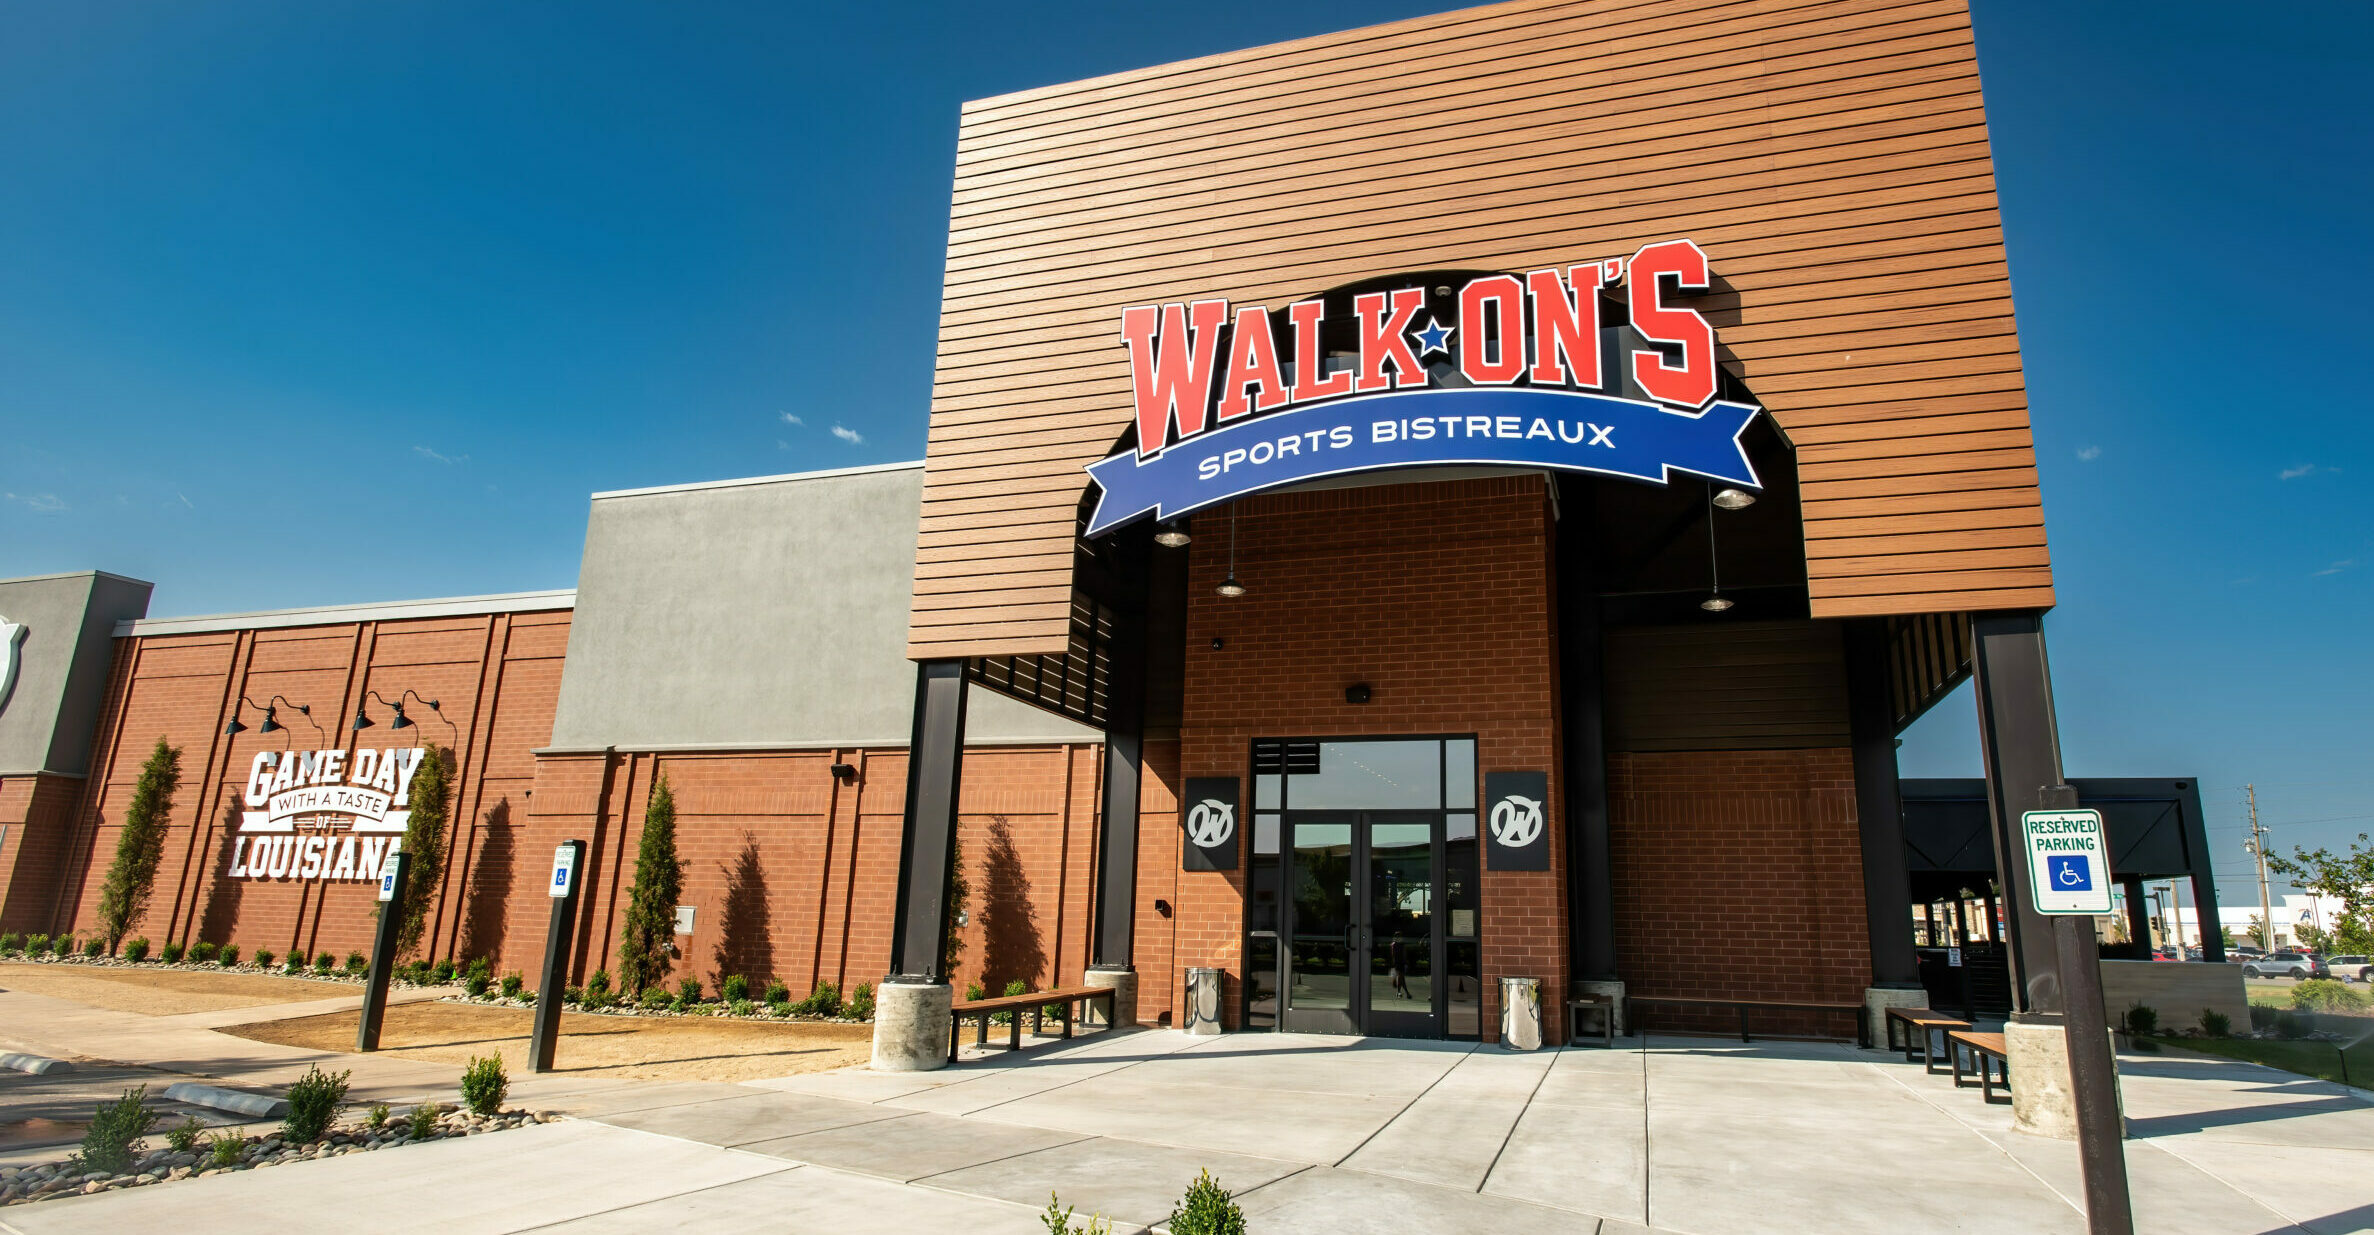 Stop in to watch a game at the newly opened Walk-On’s Sports Bistreaux!